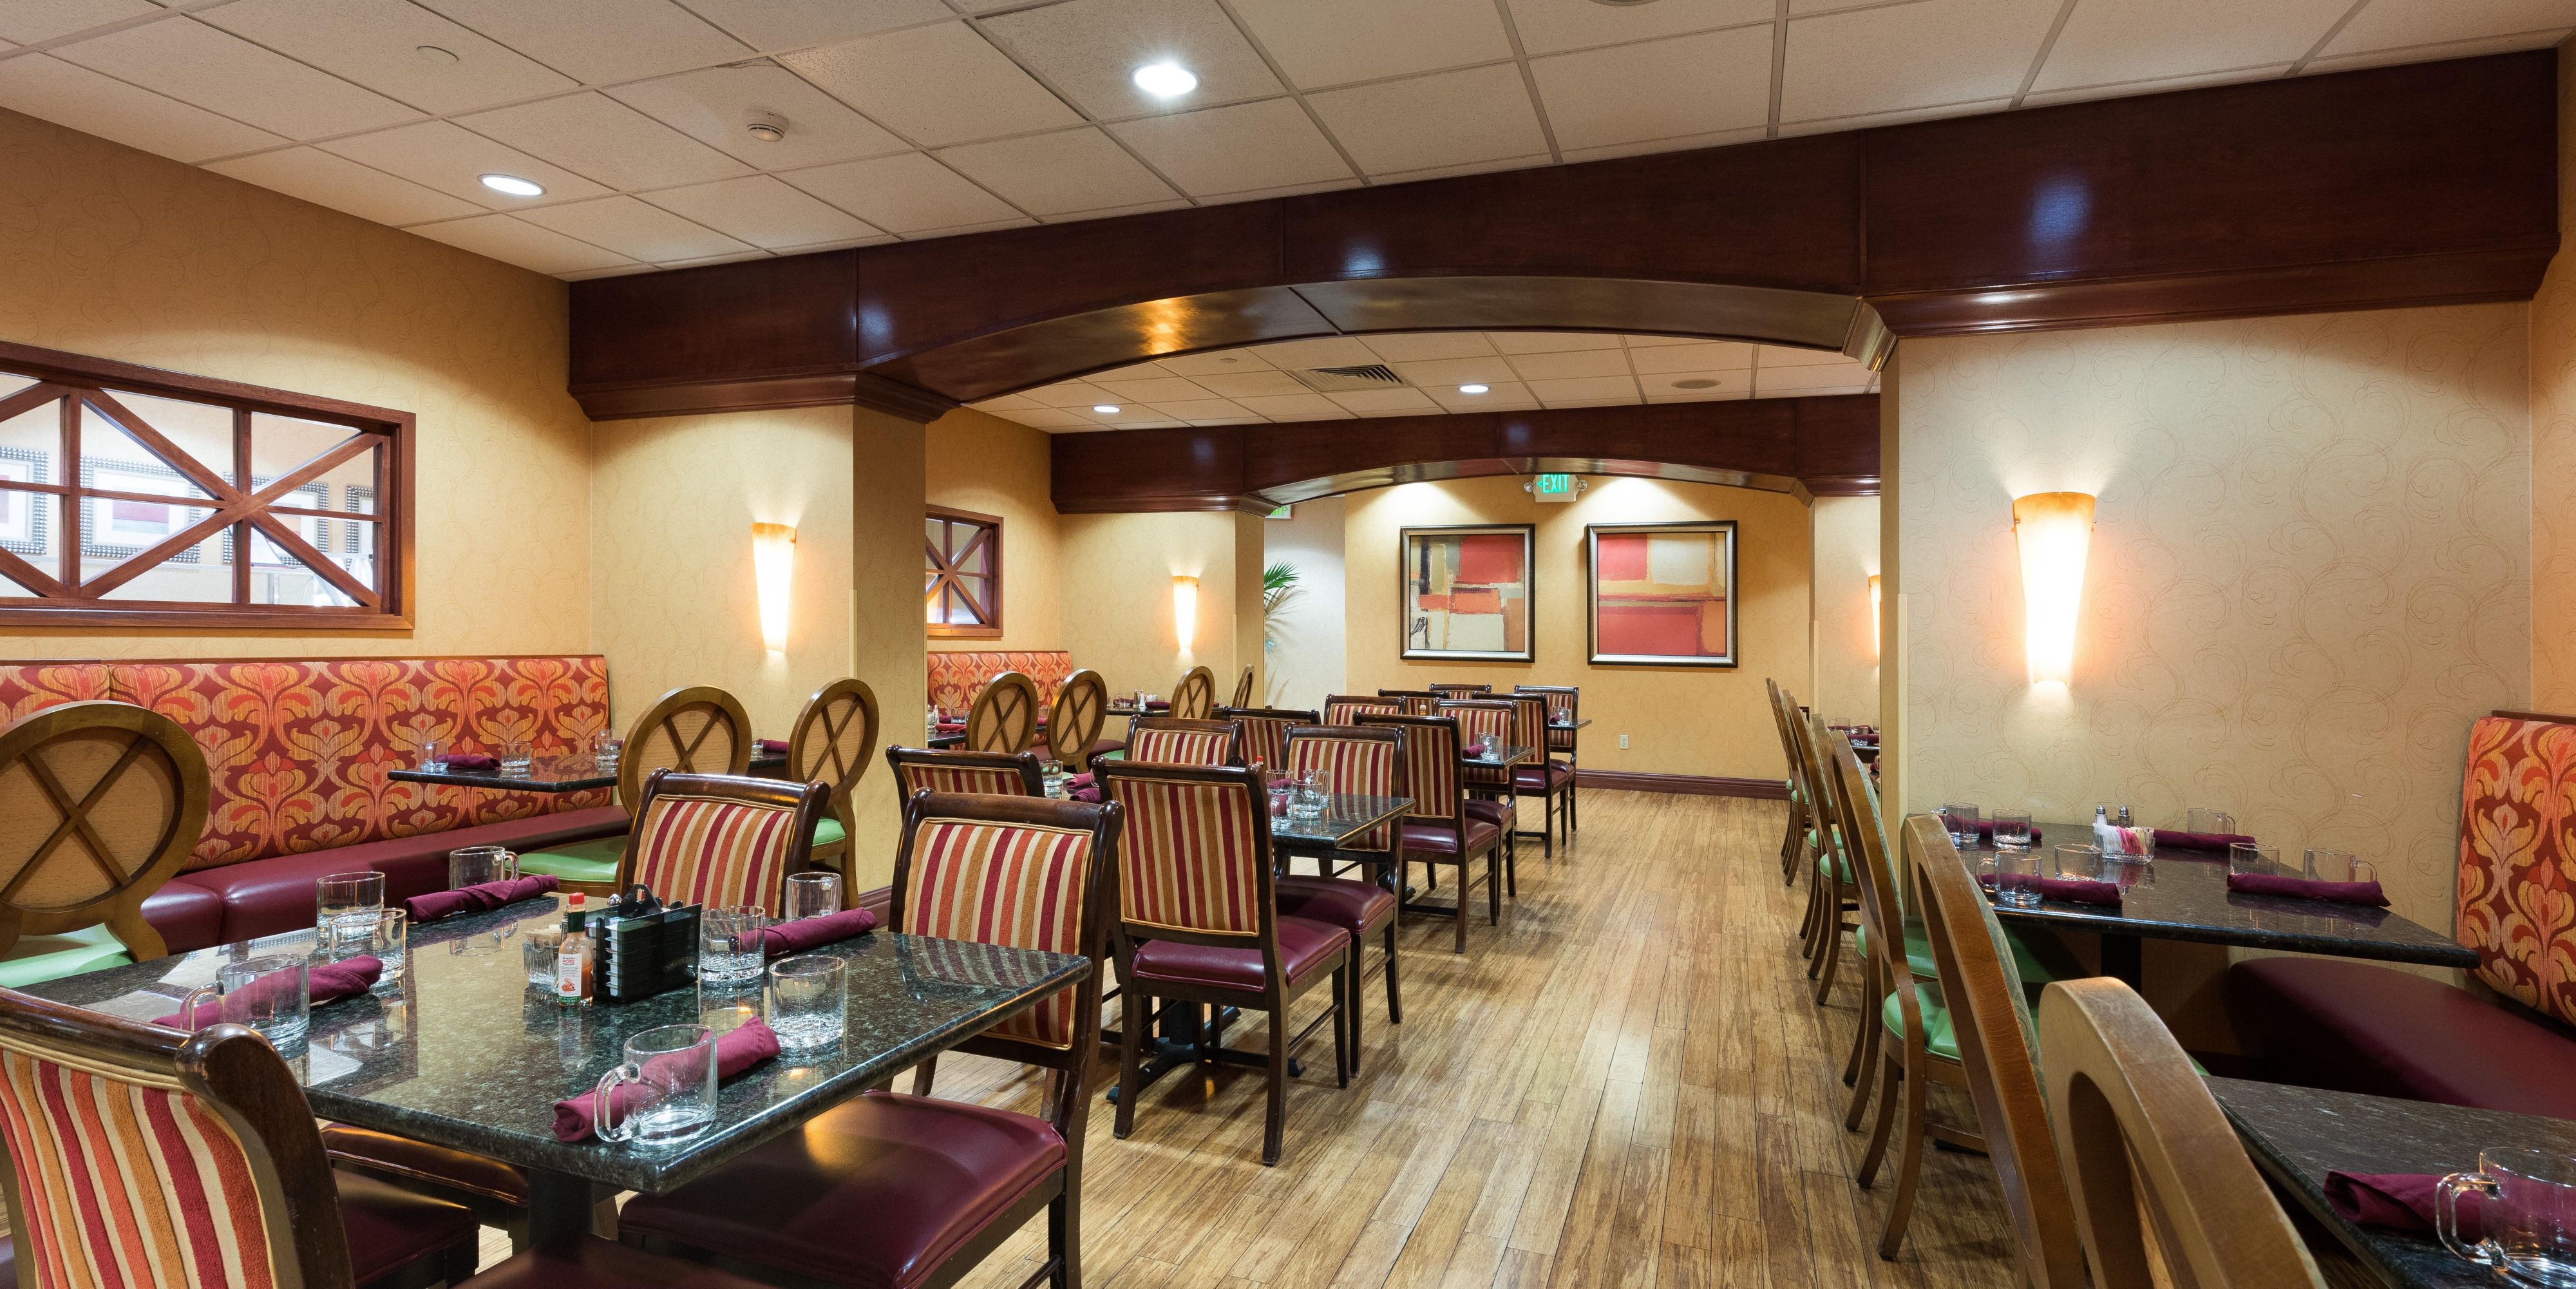 Cyprus Grill is open for breakfast, lunch and dinner.